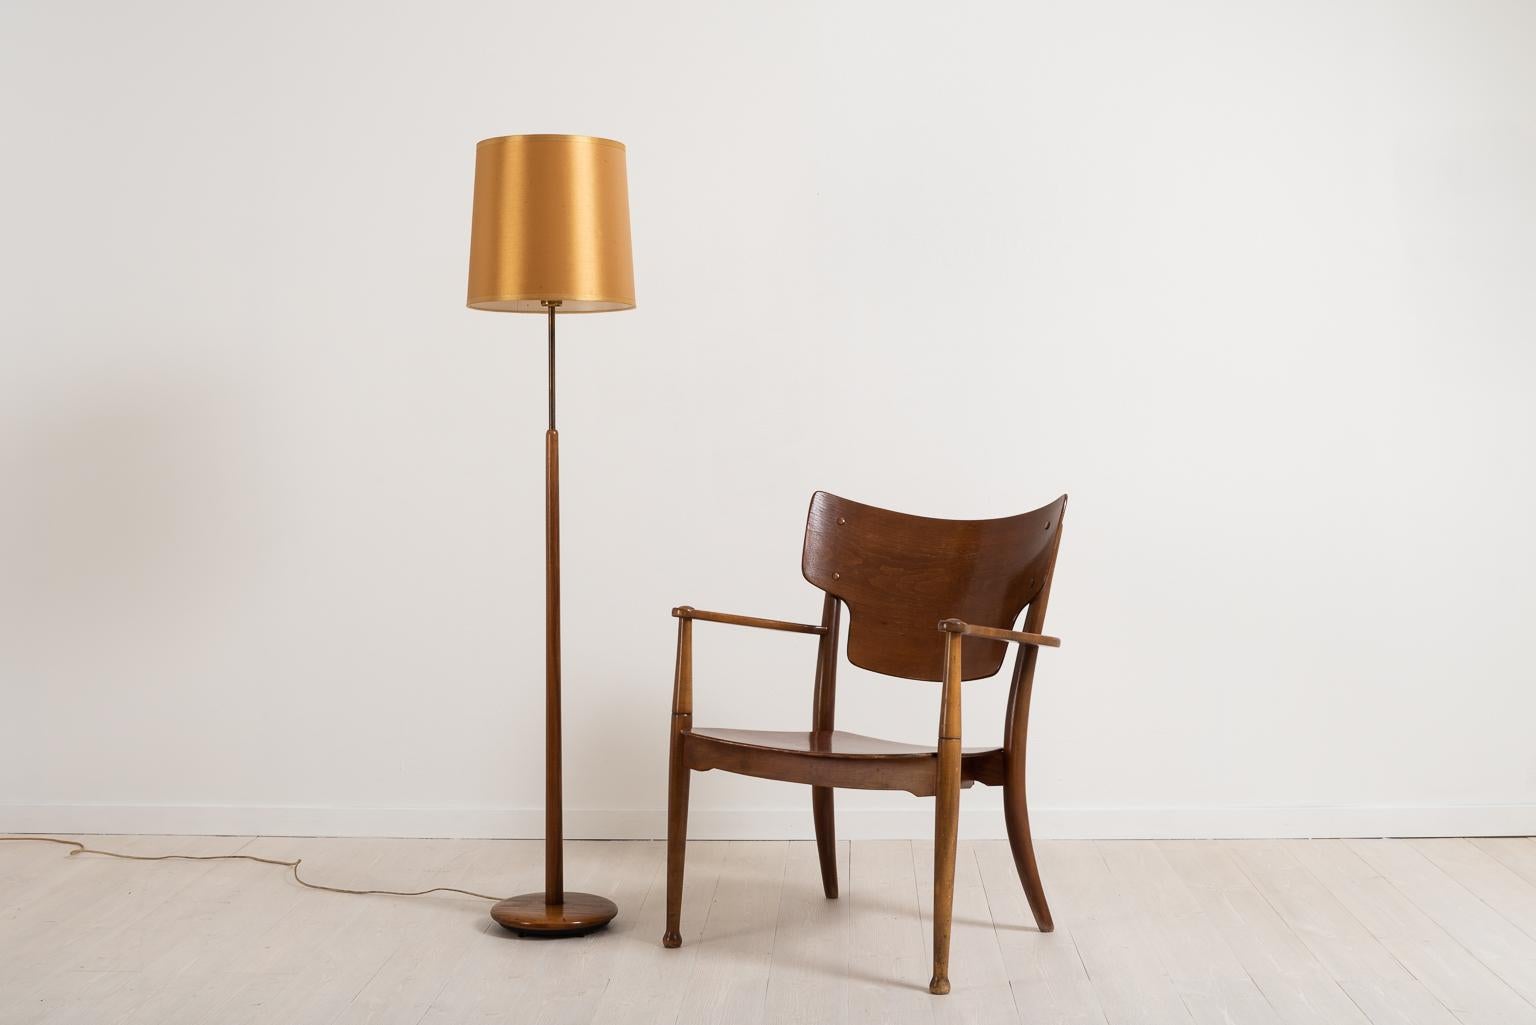 Chair 'Portex' designed 1944 by Peter Hvidt and Orla Molgaard-Nielsen. The legs are of solid beech and the seat in laminated beech.